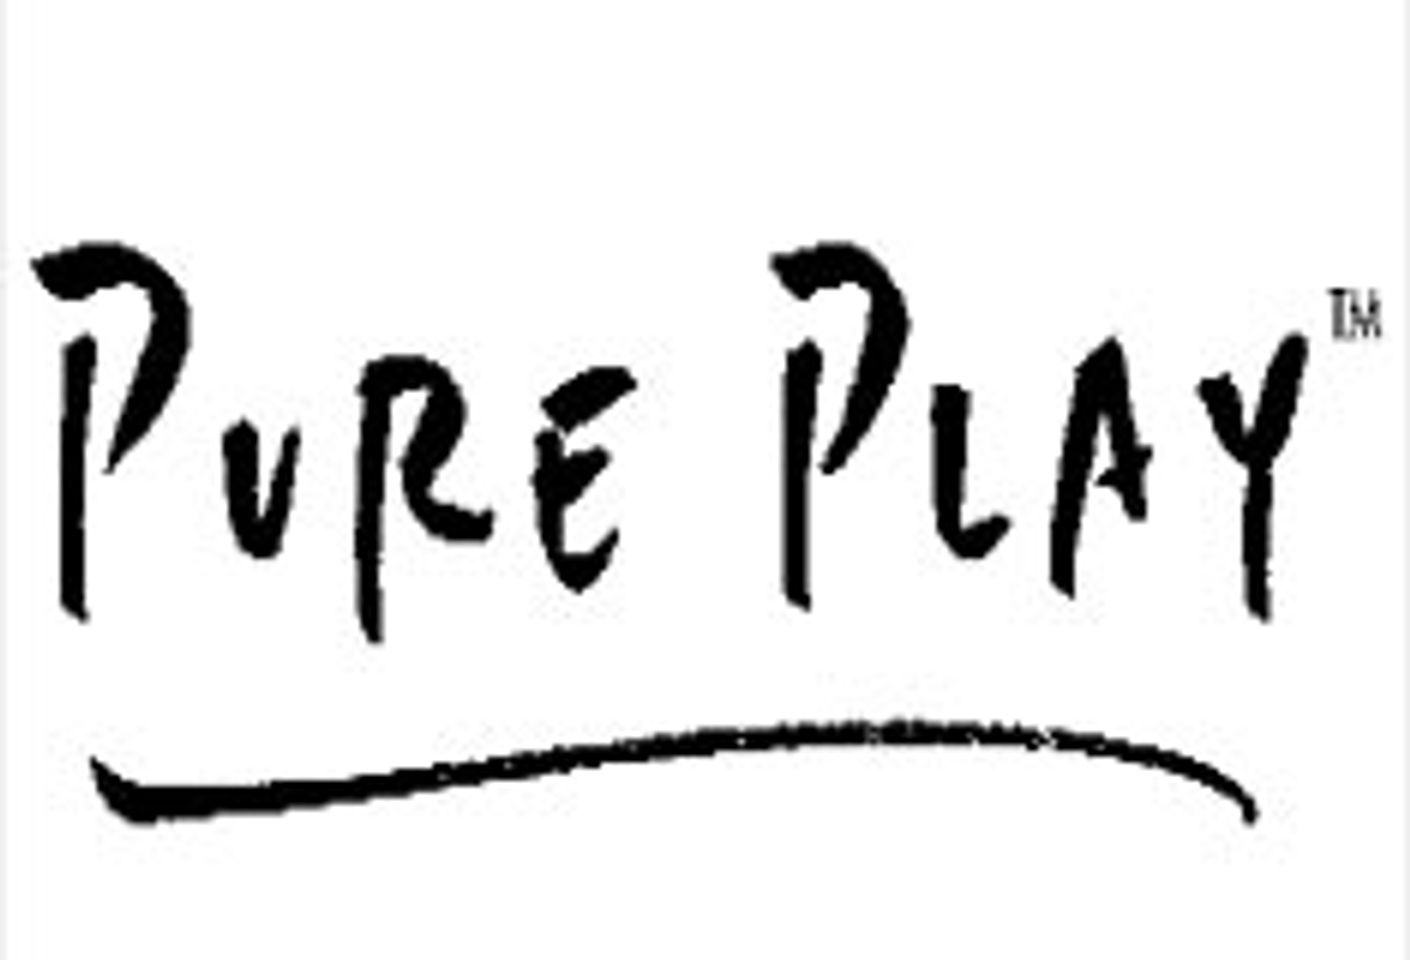 Pure Play Media Inks Distribution Deal With Erotic Media AG